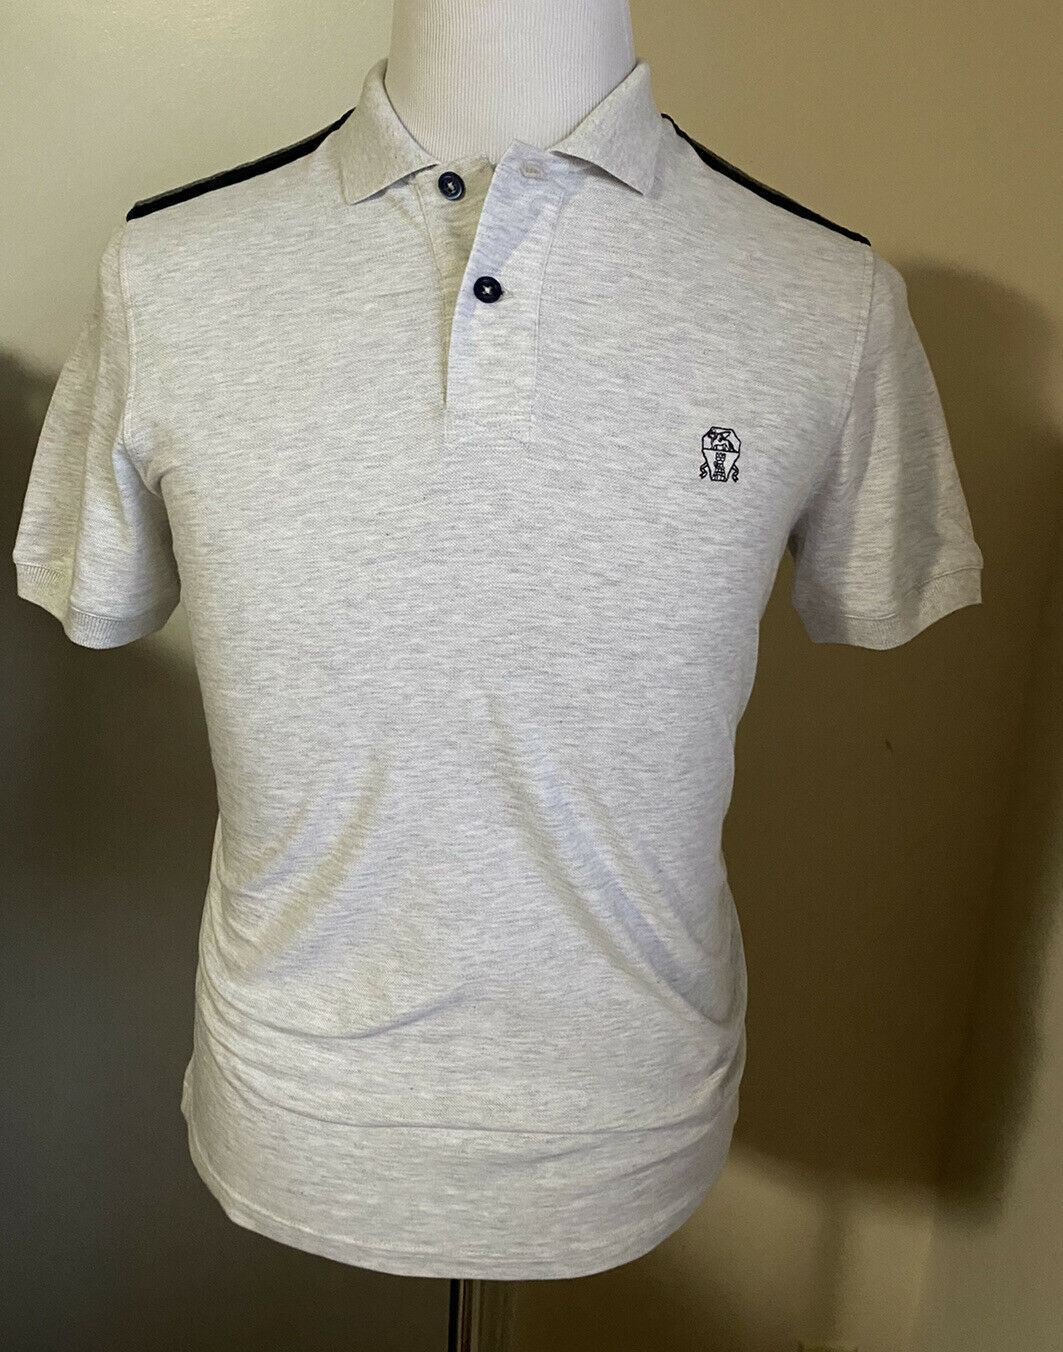 NWT $675 Brunello Cucinelli Mens Slim Fit Polo Shirt Gray S Italy